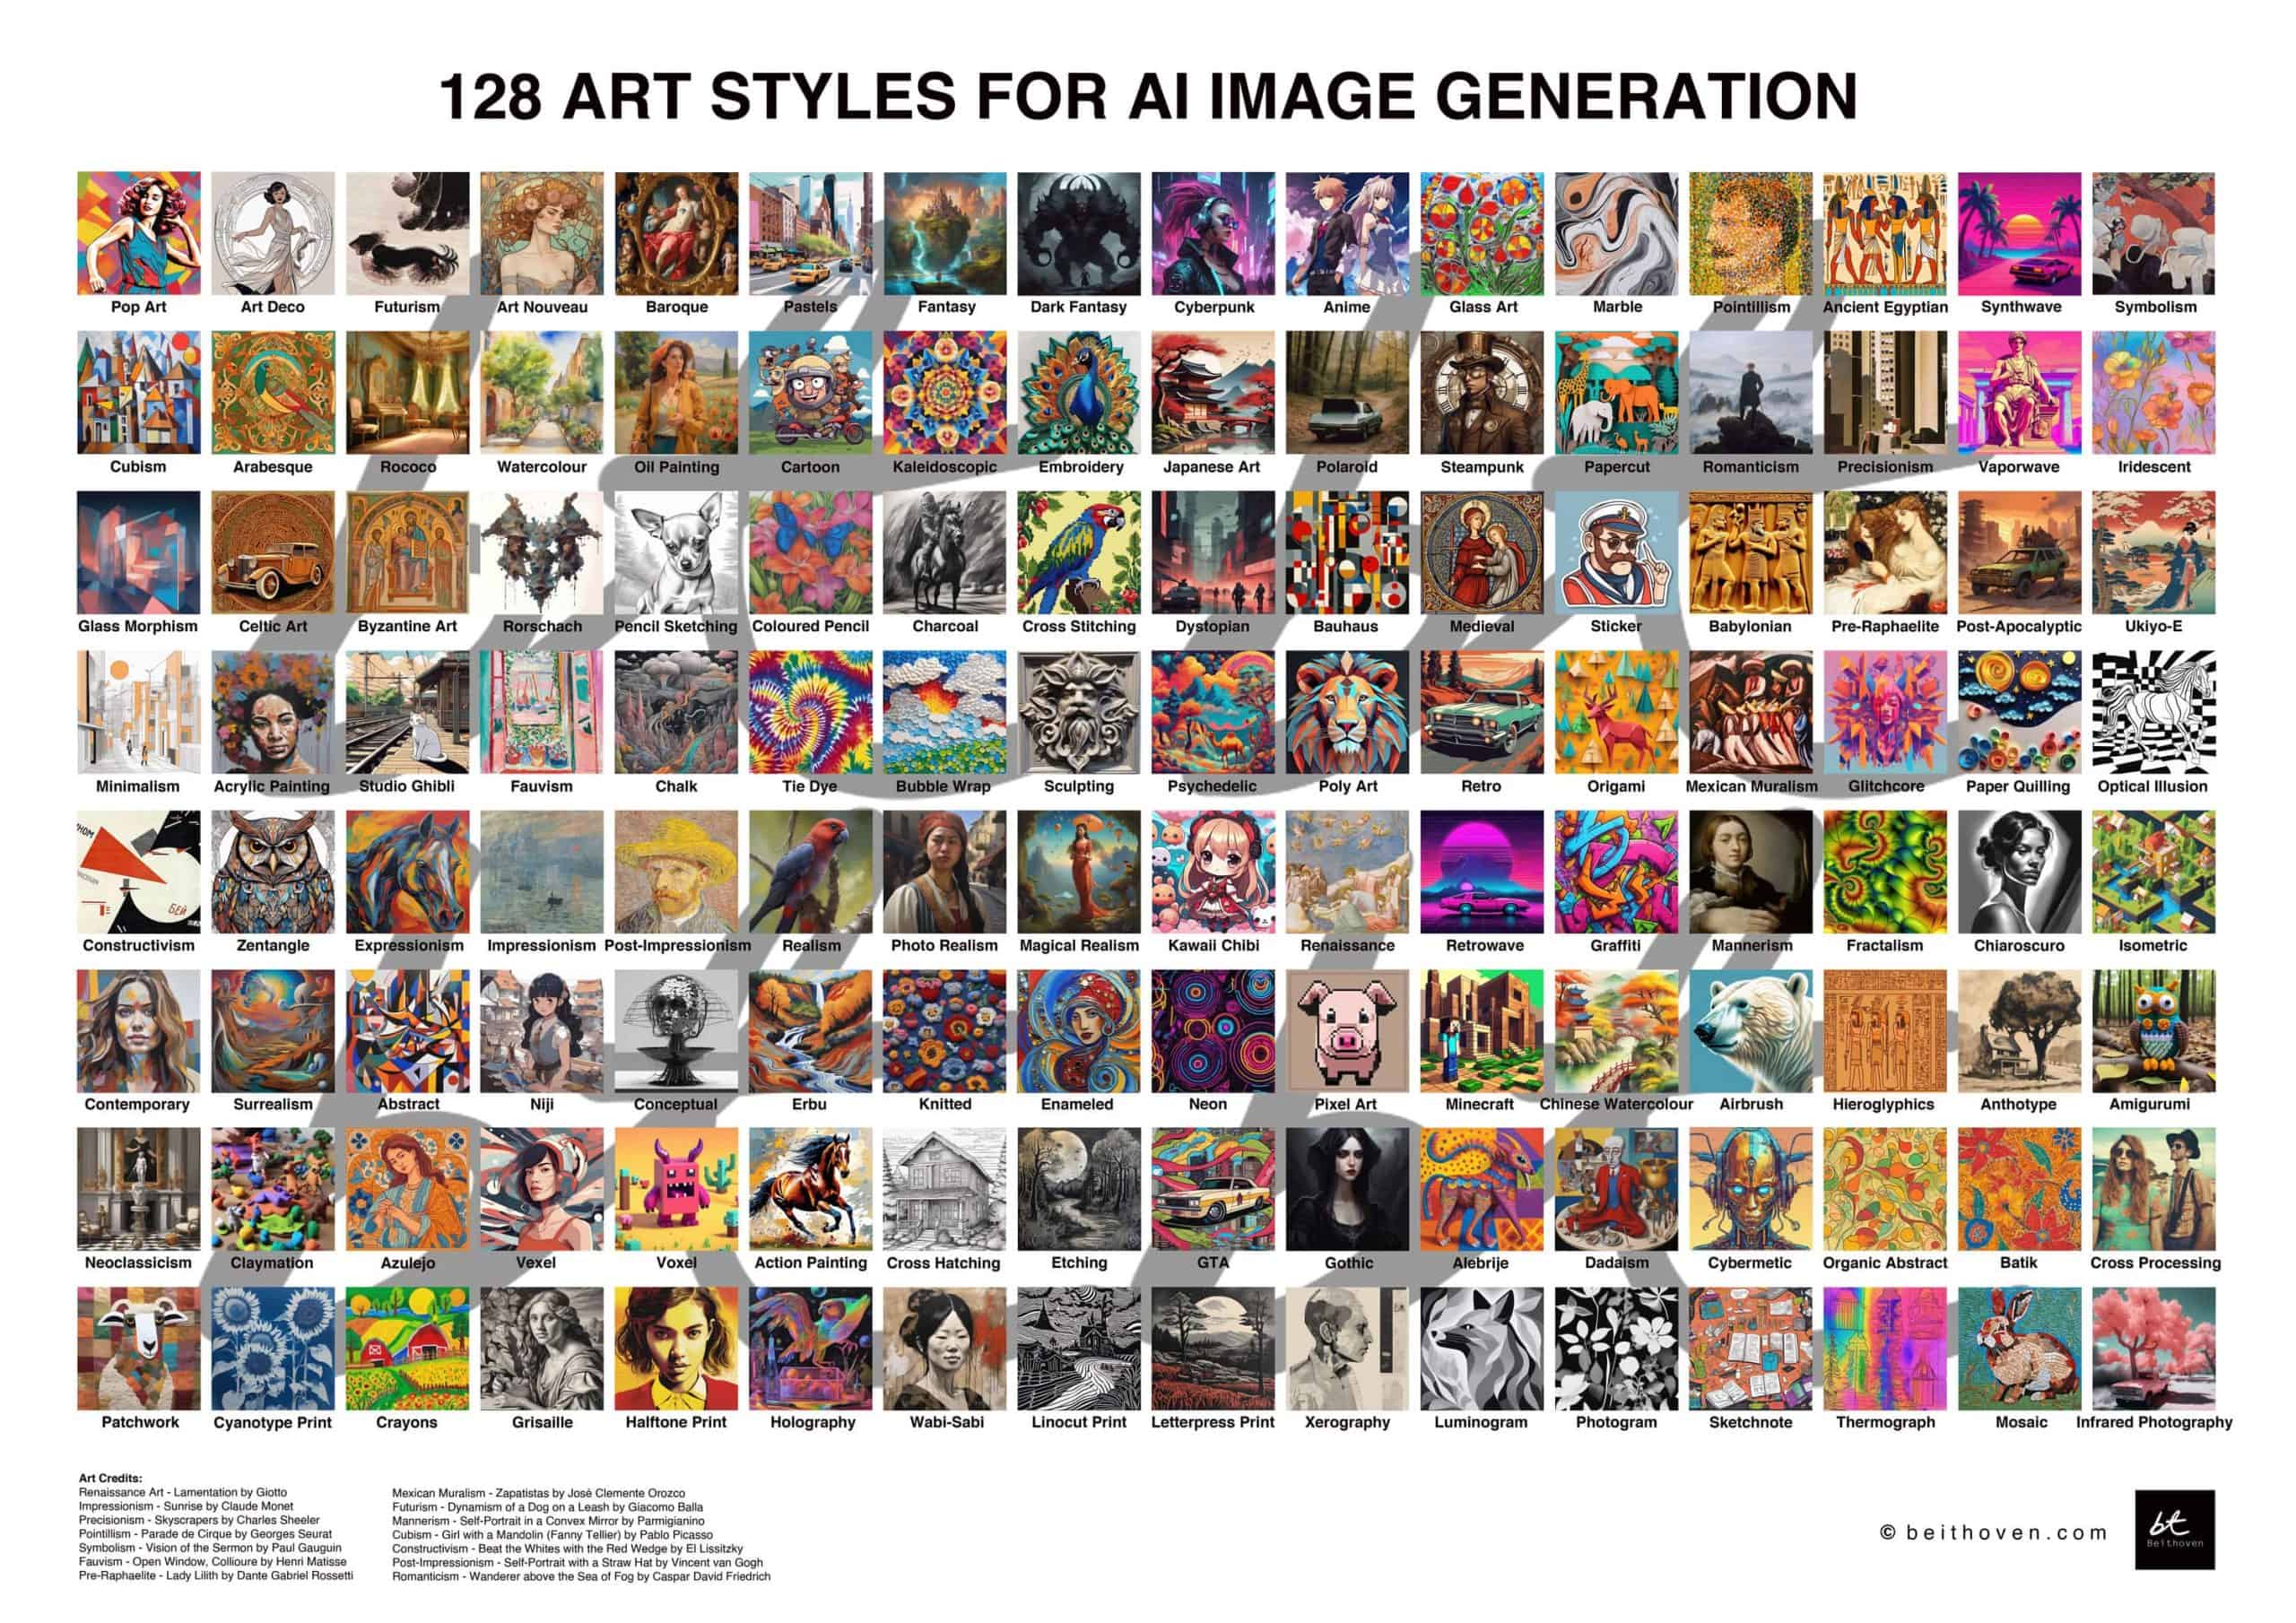 128 Art Styles for AI Image Generation